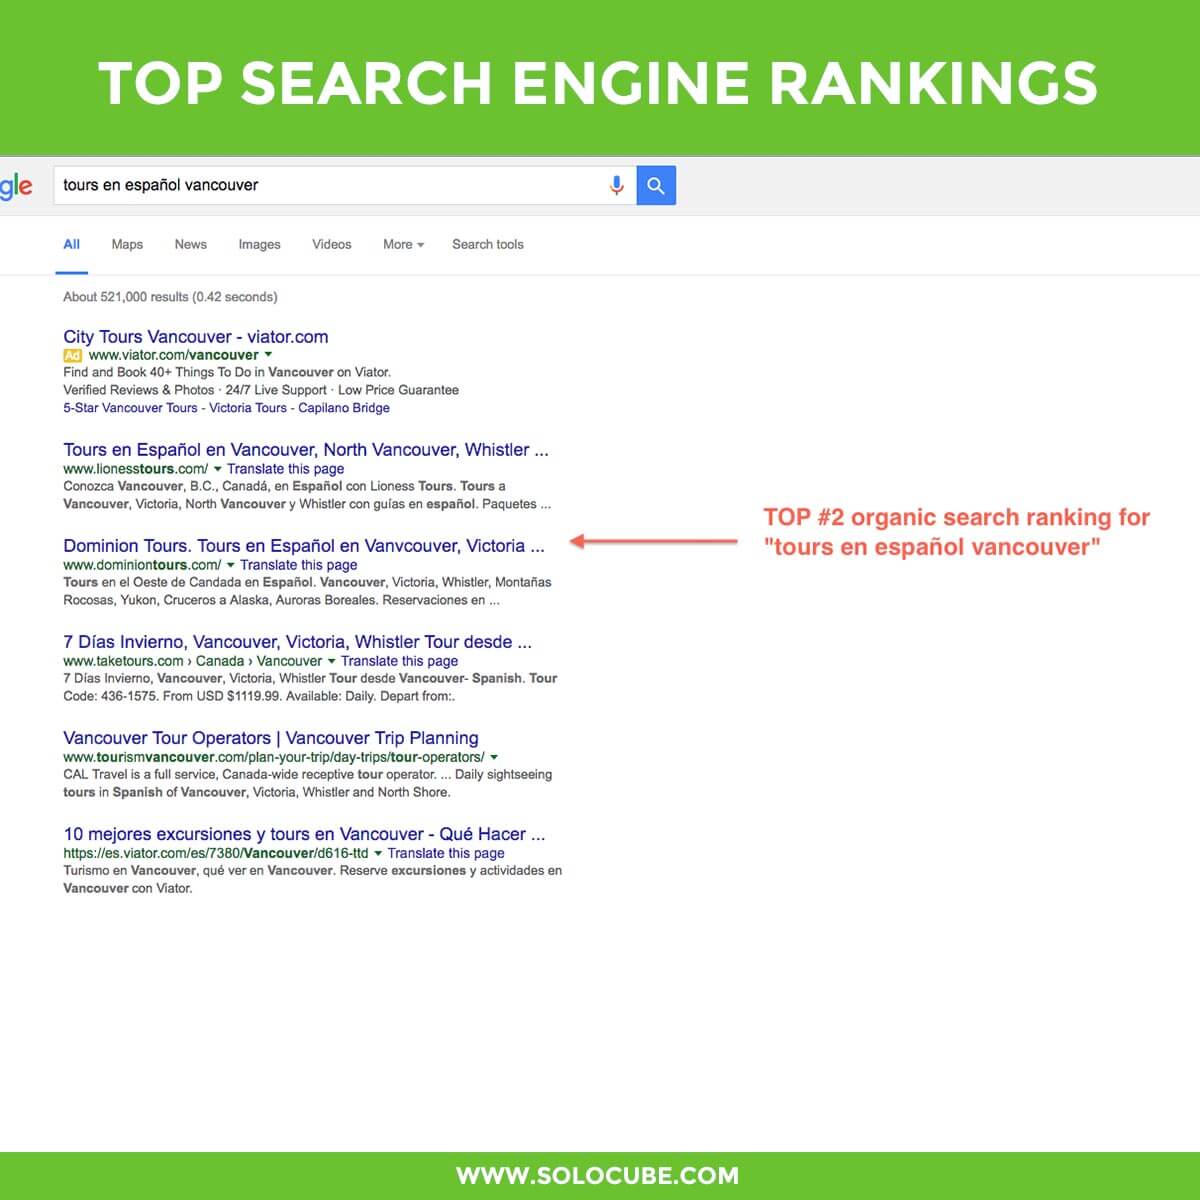 top SEO google ranking by solocube 08 - SEO Prince George, BC